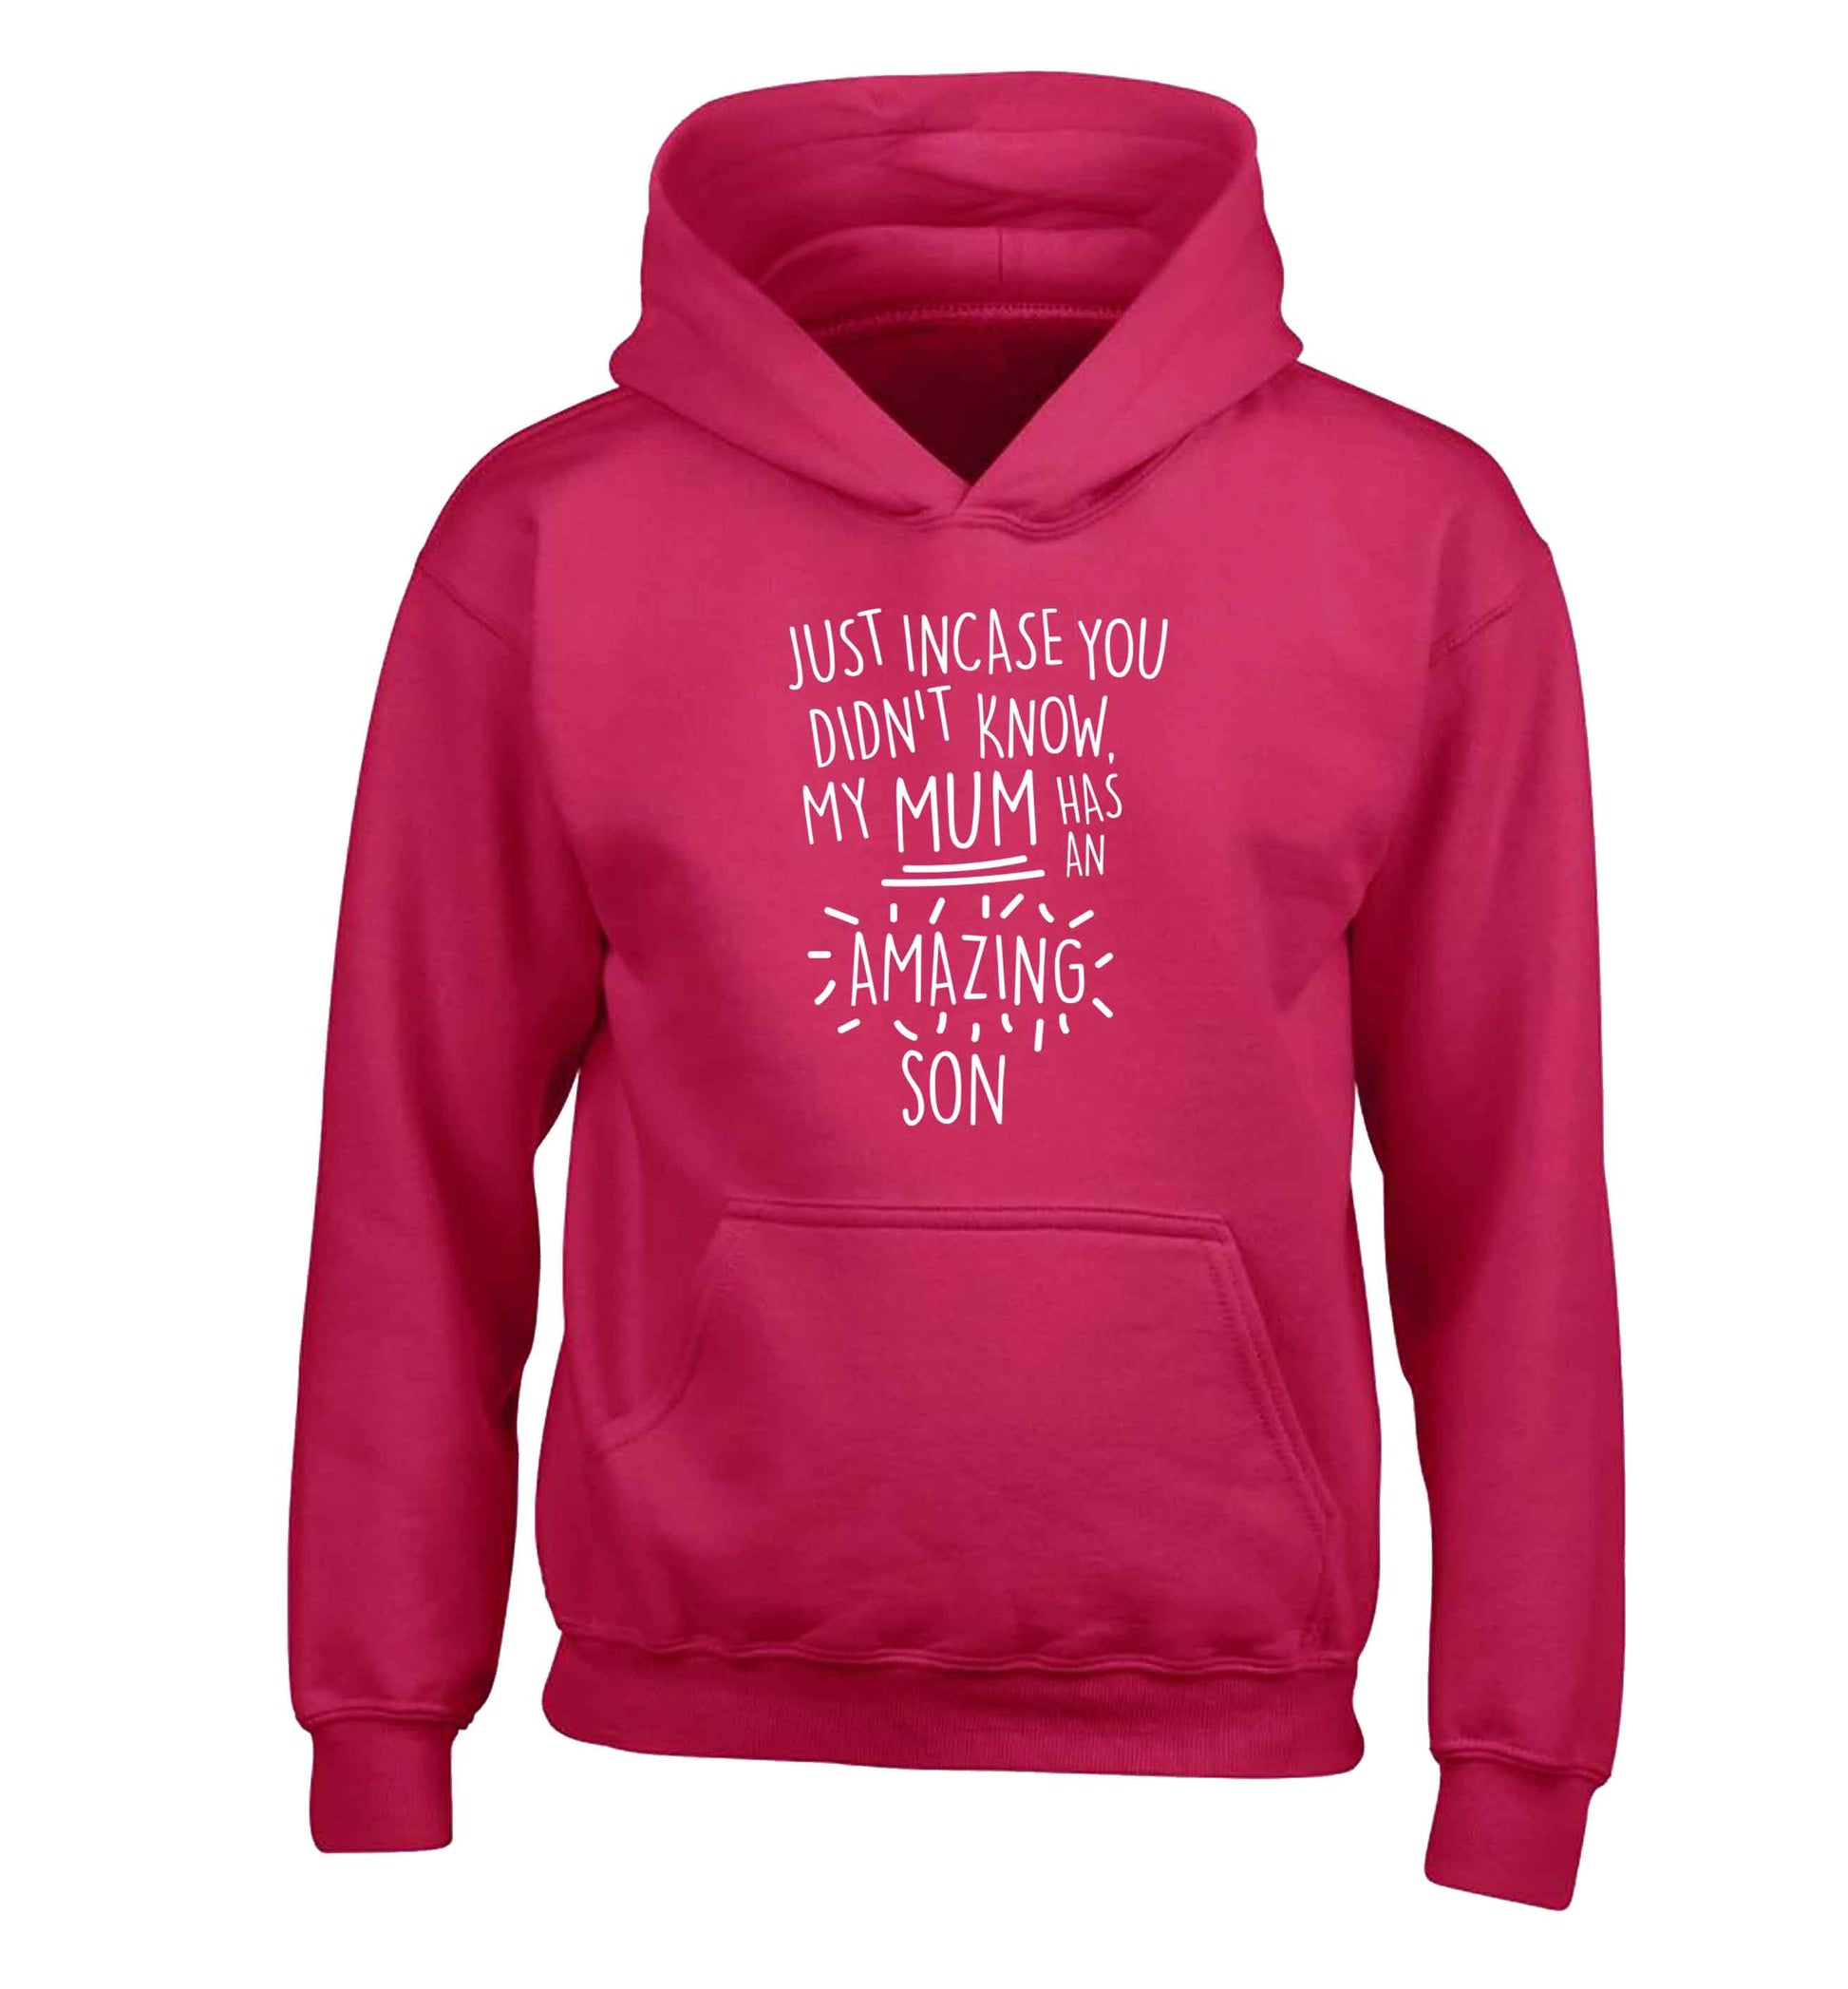 Just incase you didn't know my mum has an amazing son children's pink hoodie 12-13 Years